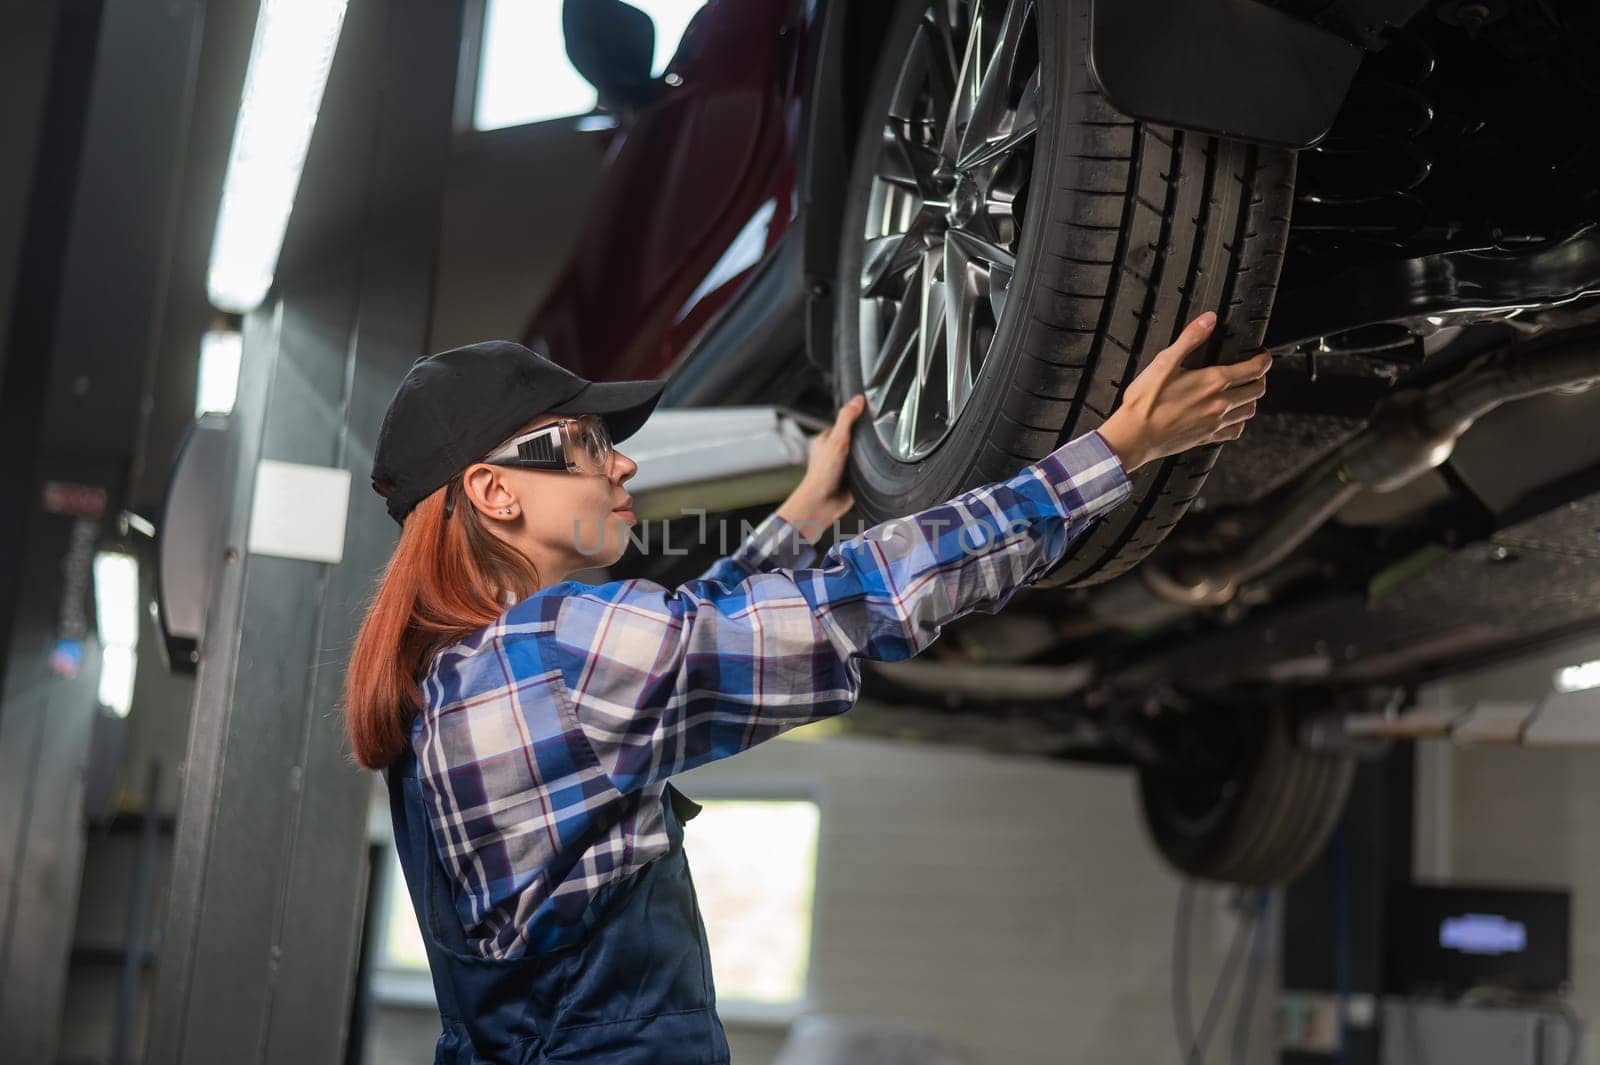 Female mechanic adjusting the tire of the car that is on the lift. A girl at a man's work